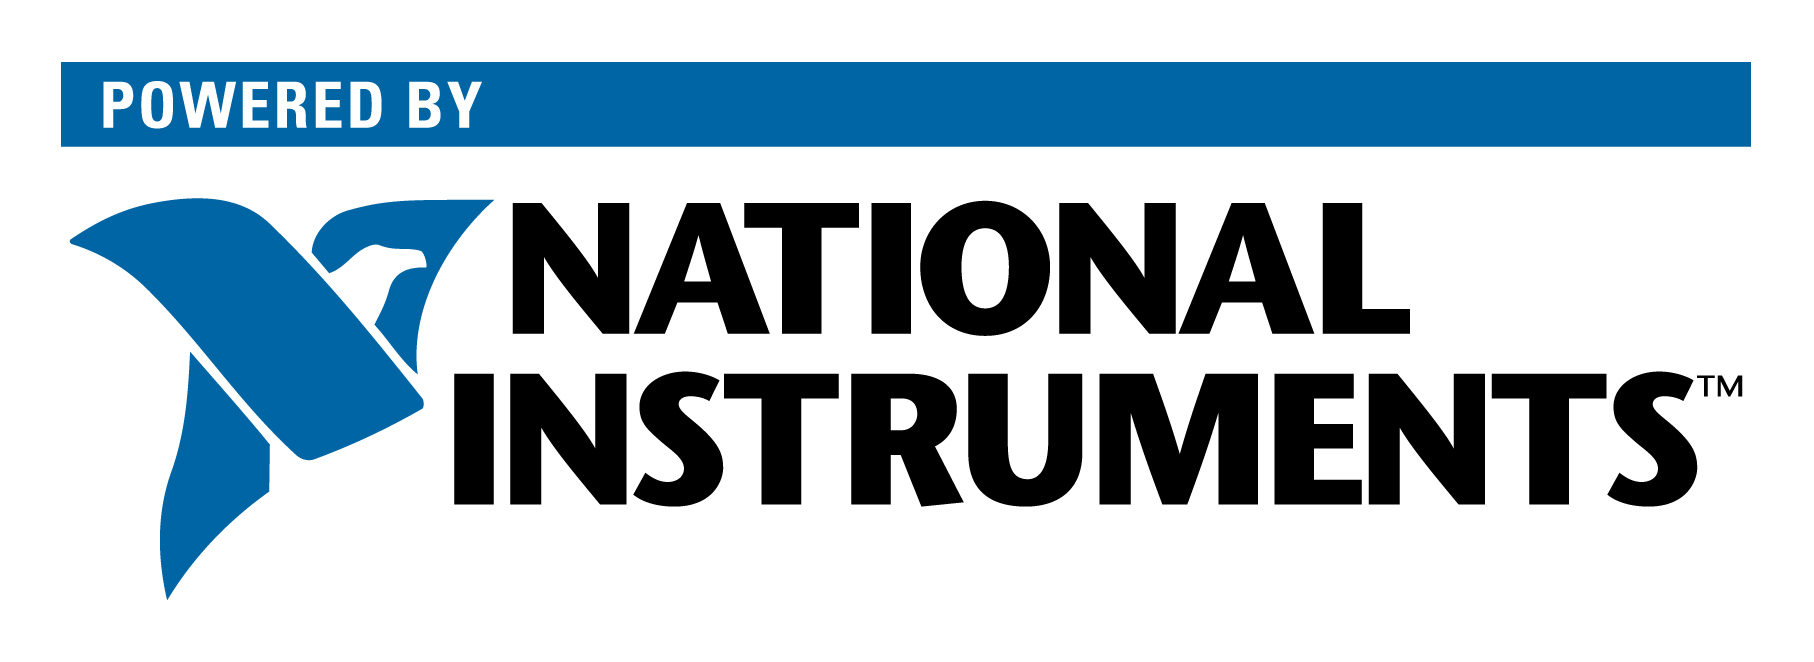 National-Instruments_PWRD